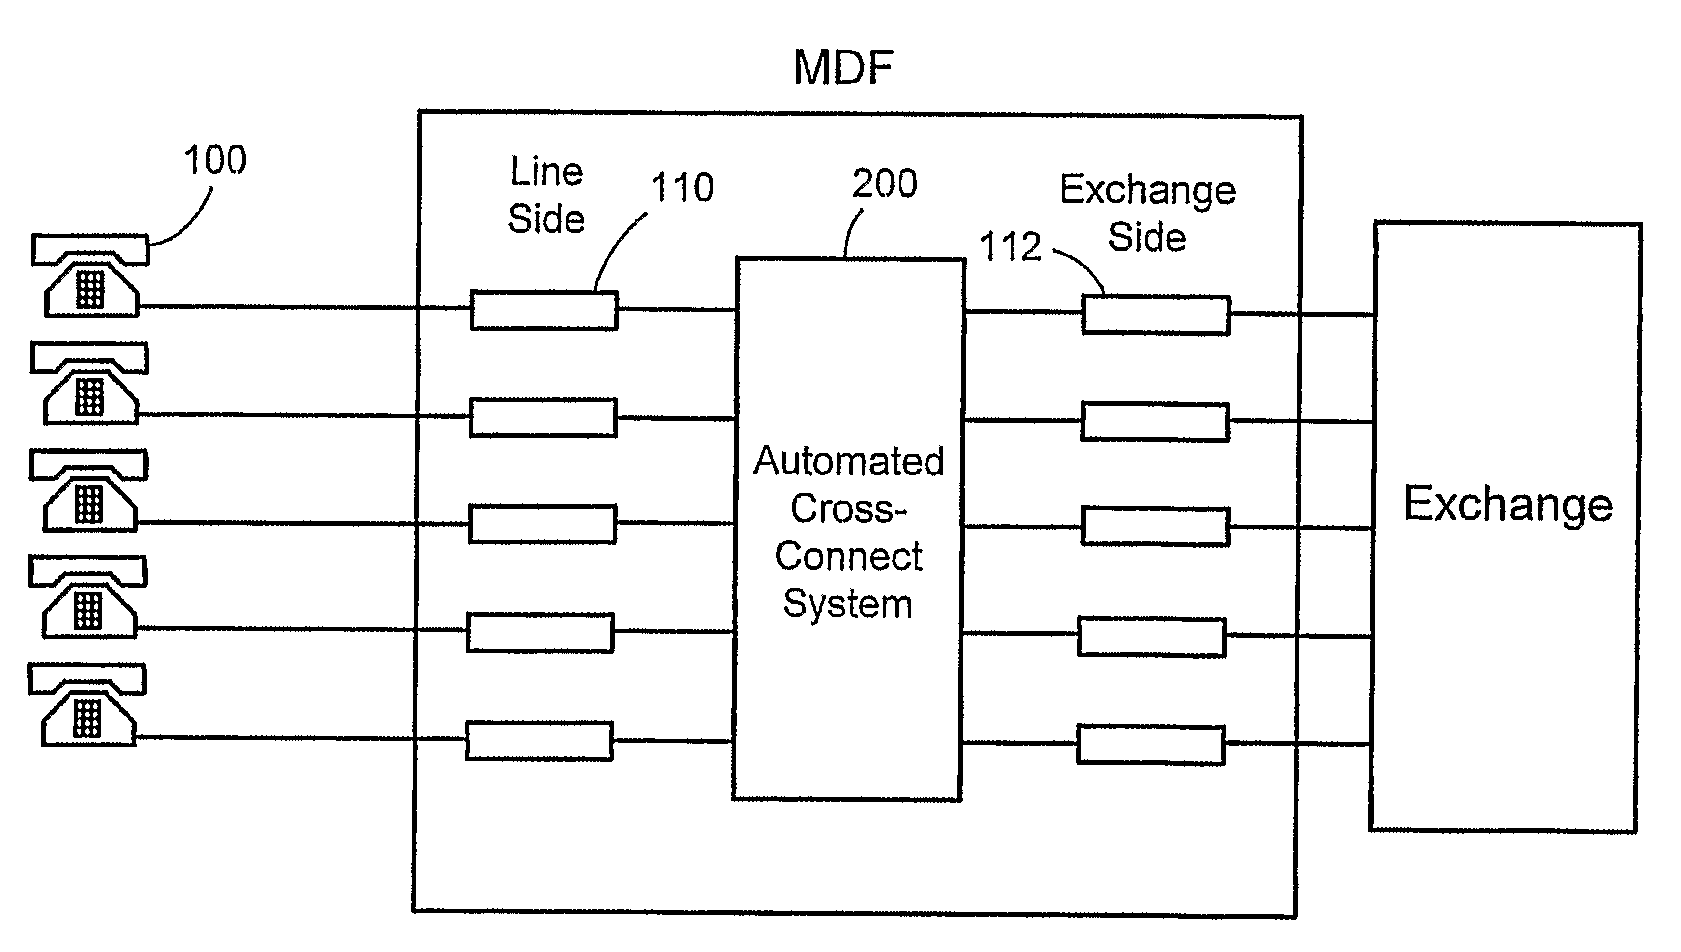 Method and System for Scanning and Detecting Metallic Cross-Connects